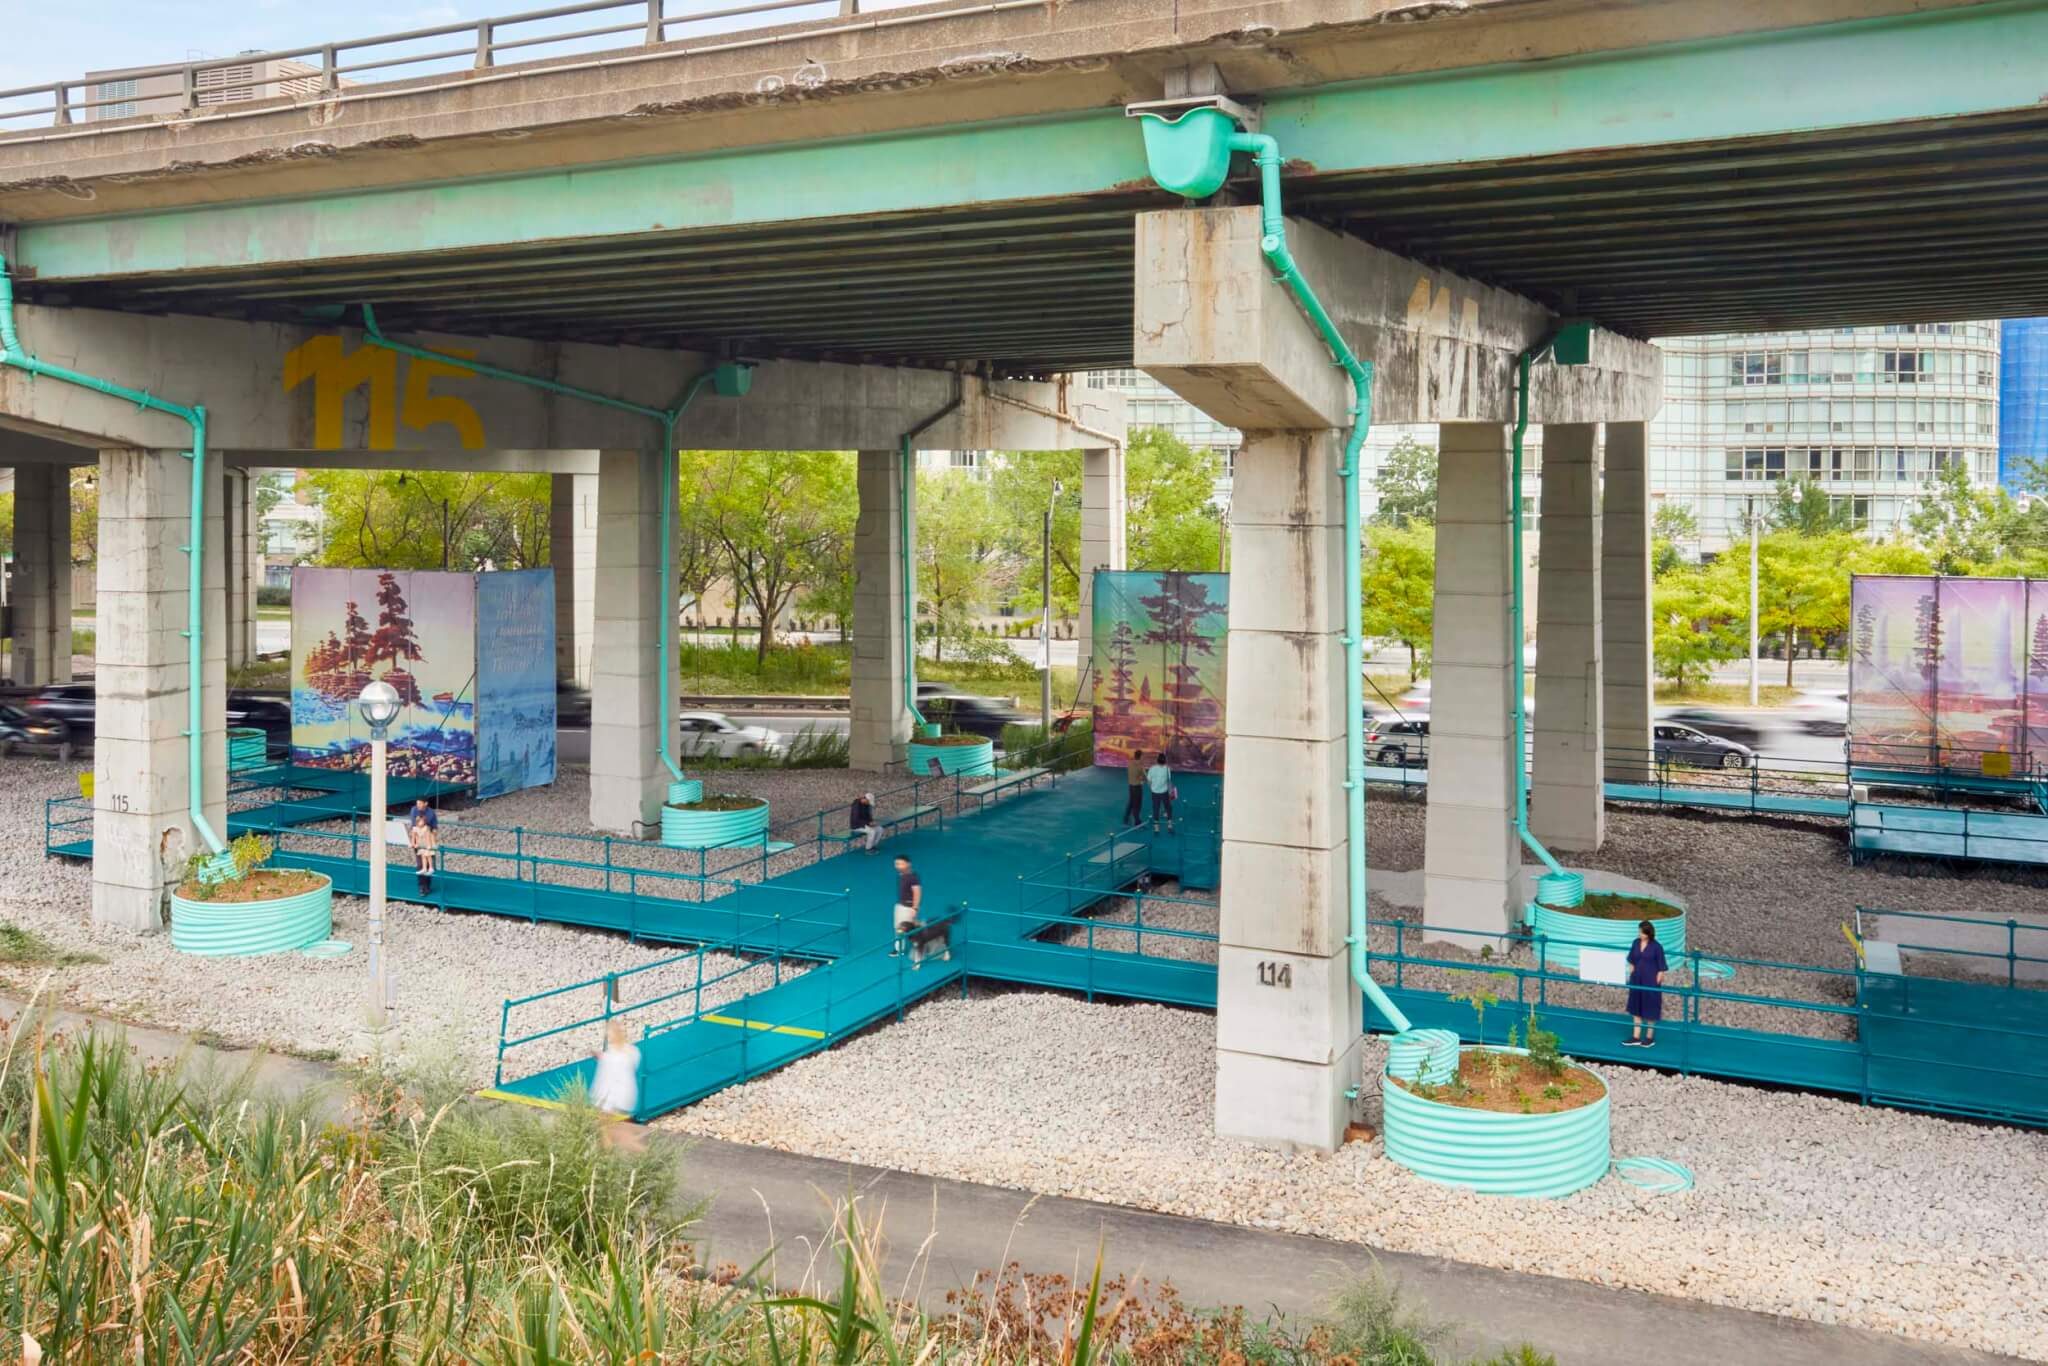 Staging Grounds repurposes infrastructure as an educational garden